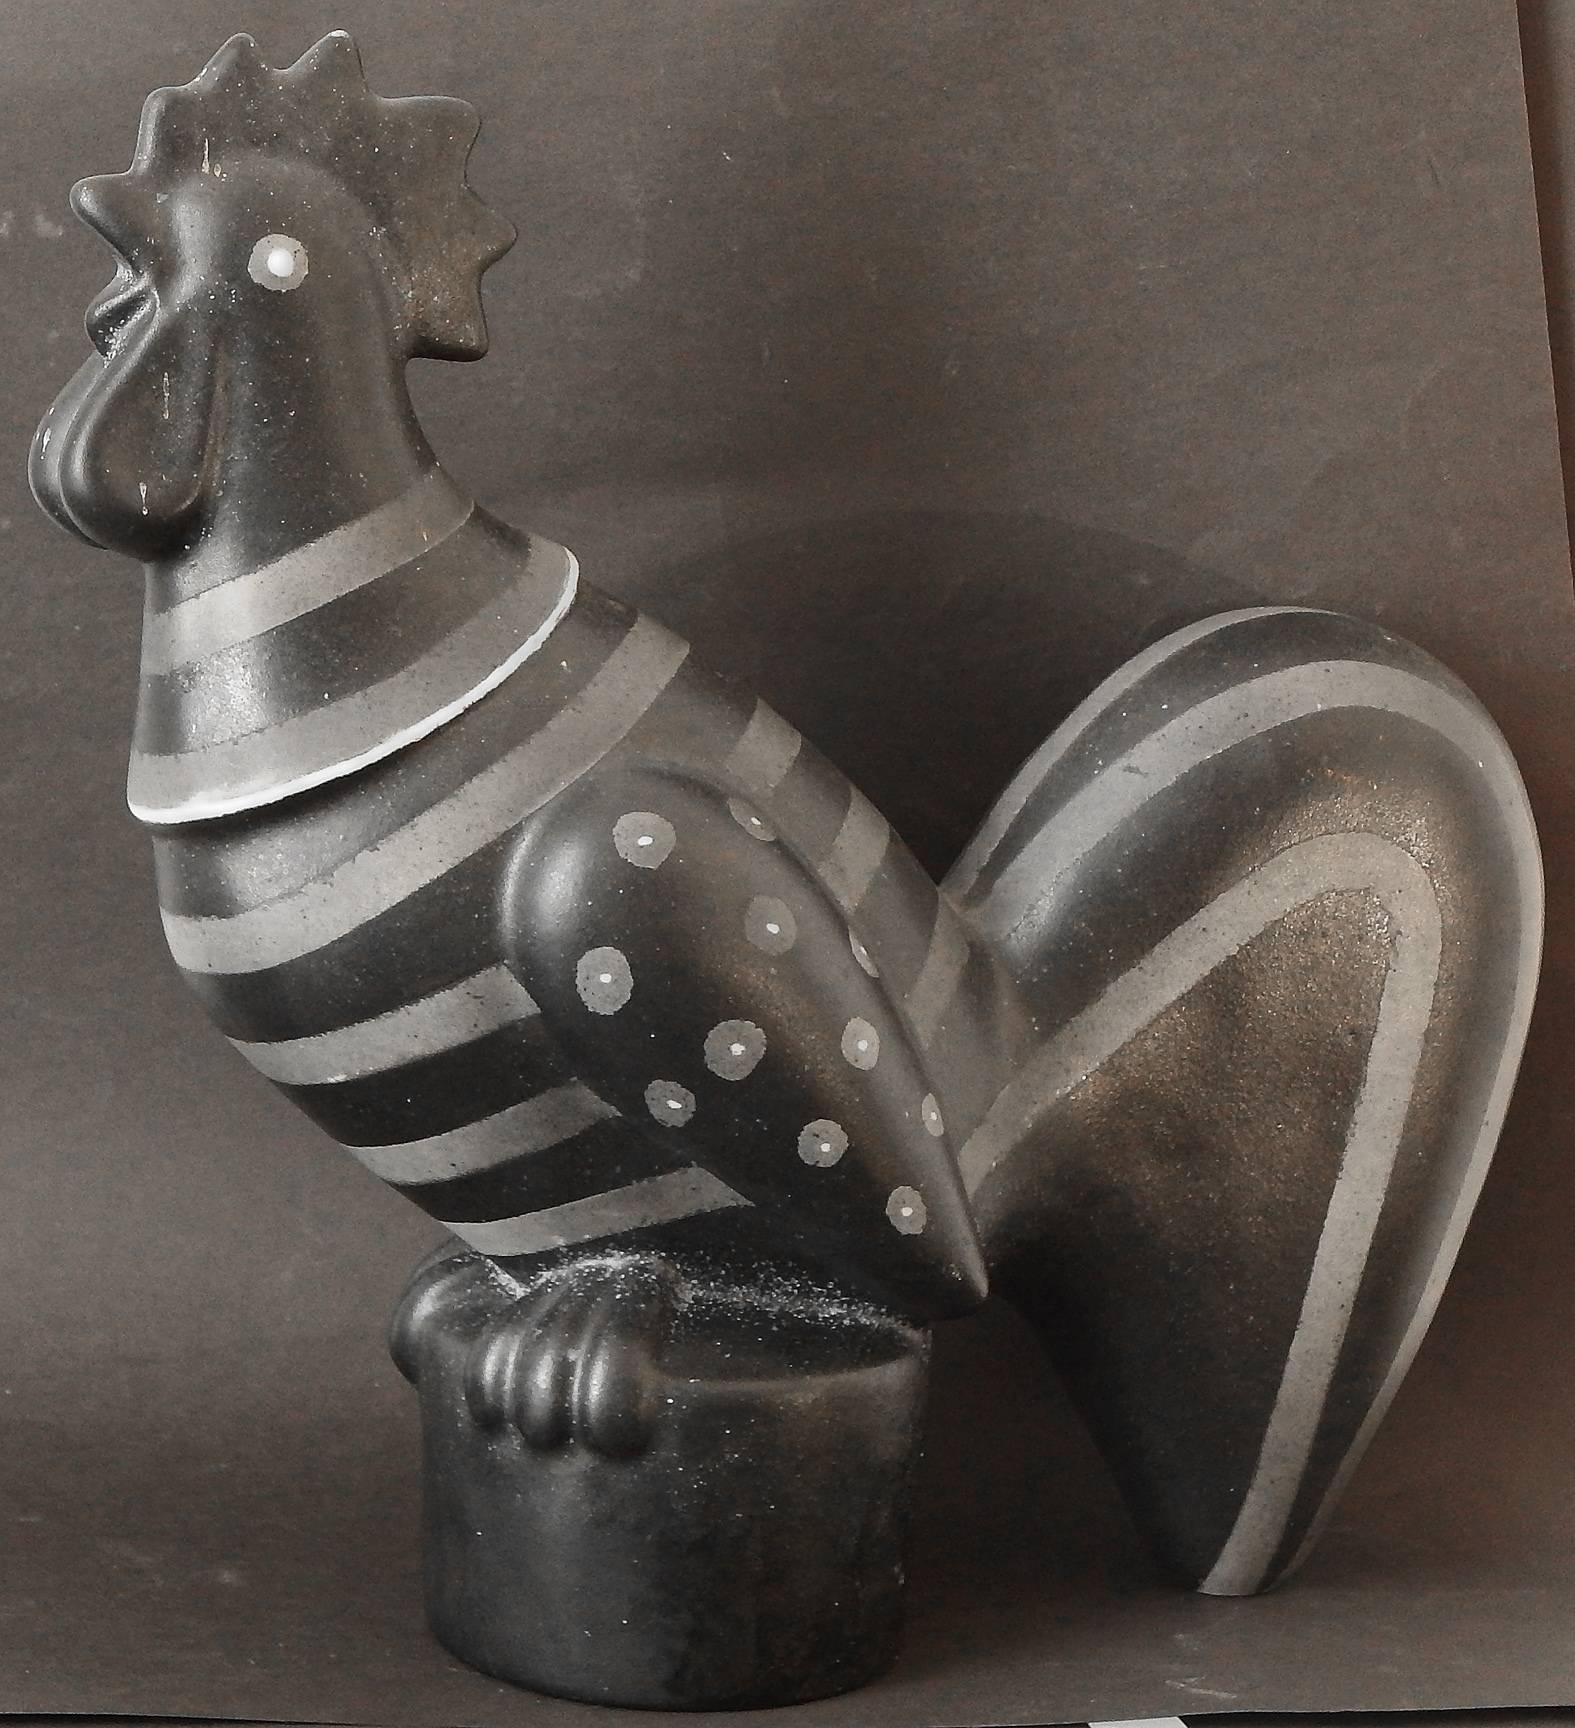 Striking and bold, this rare and large ceramic sculpture by Waylande Gregory depicts a rooster with striped body and dotted wings, in tones of black and charcoal with touches of white. Gregory was a renowned WPA sculptor and innovative ceramicist,